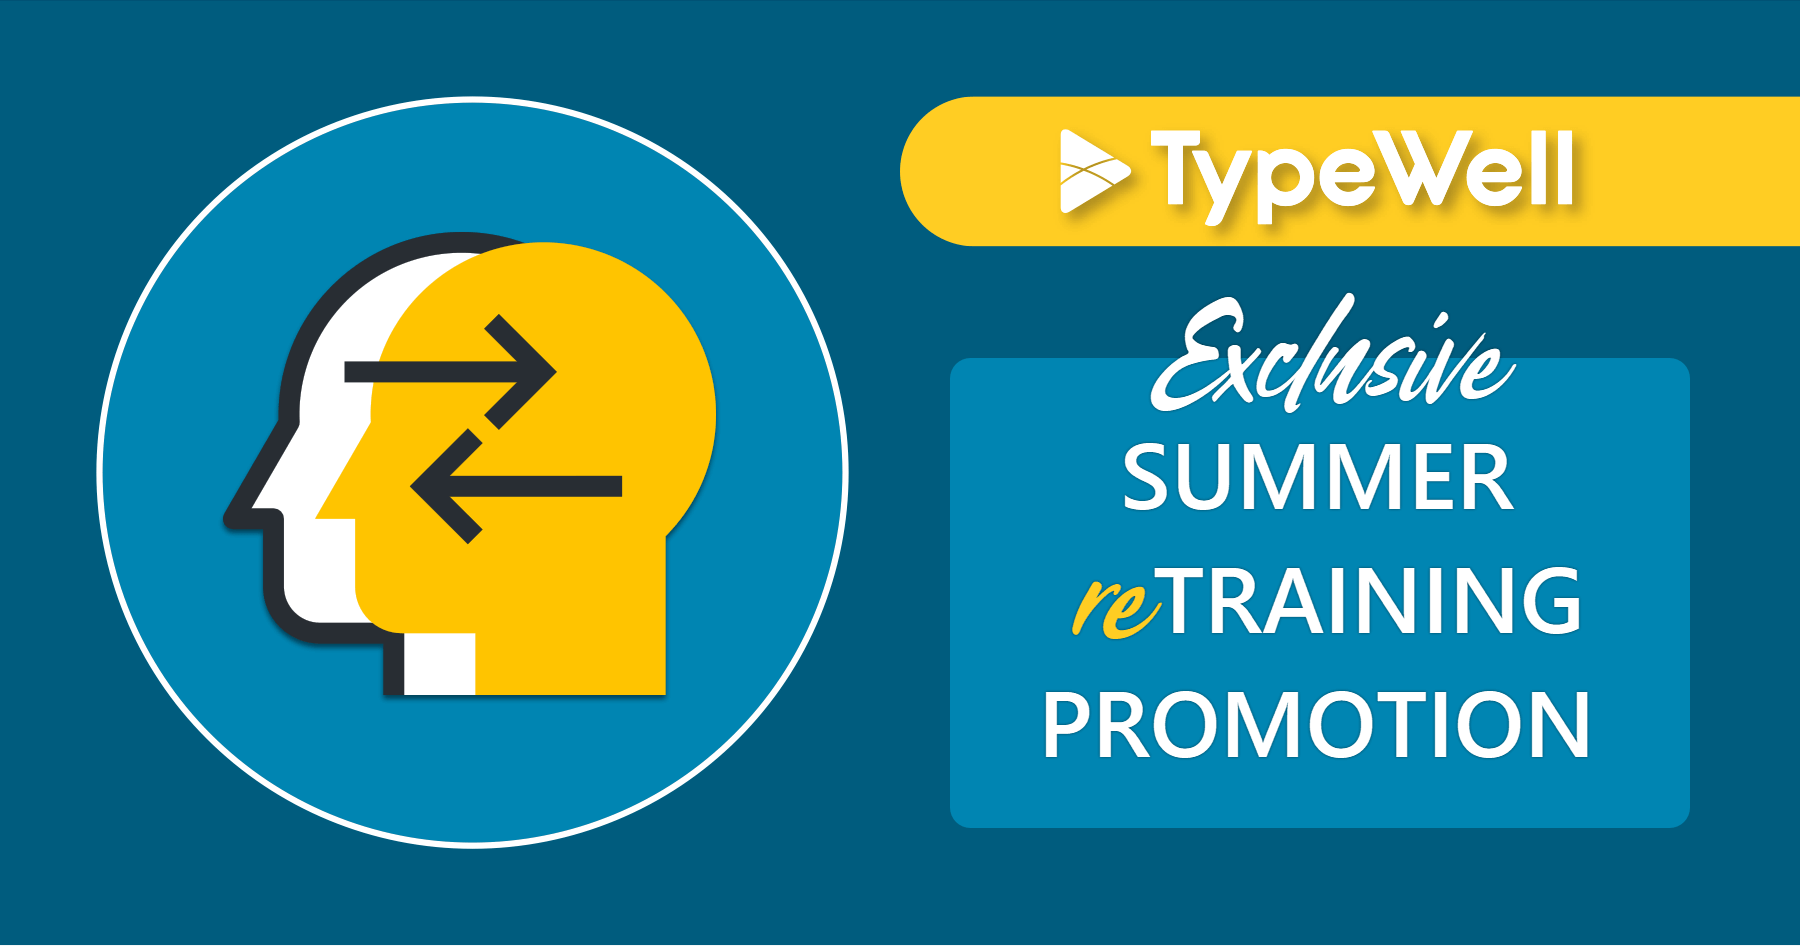 blue background with yellow and white text: "exclusive summer re-training promotion"